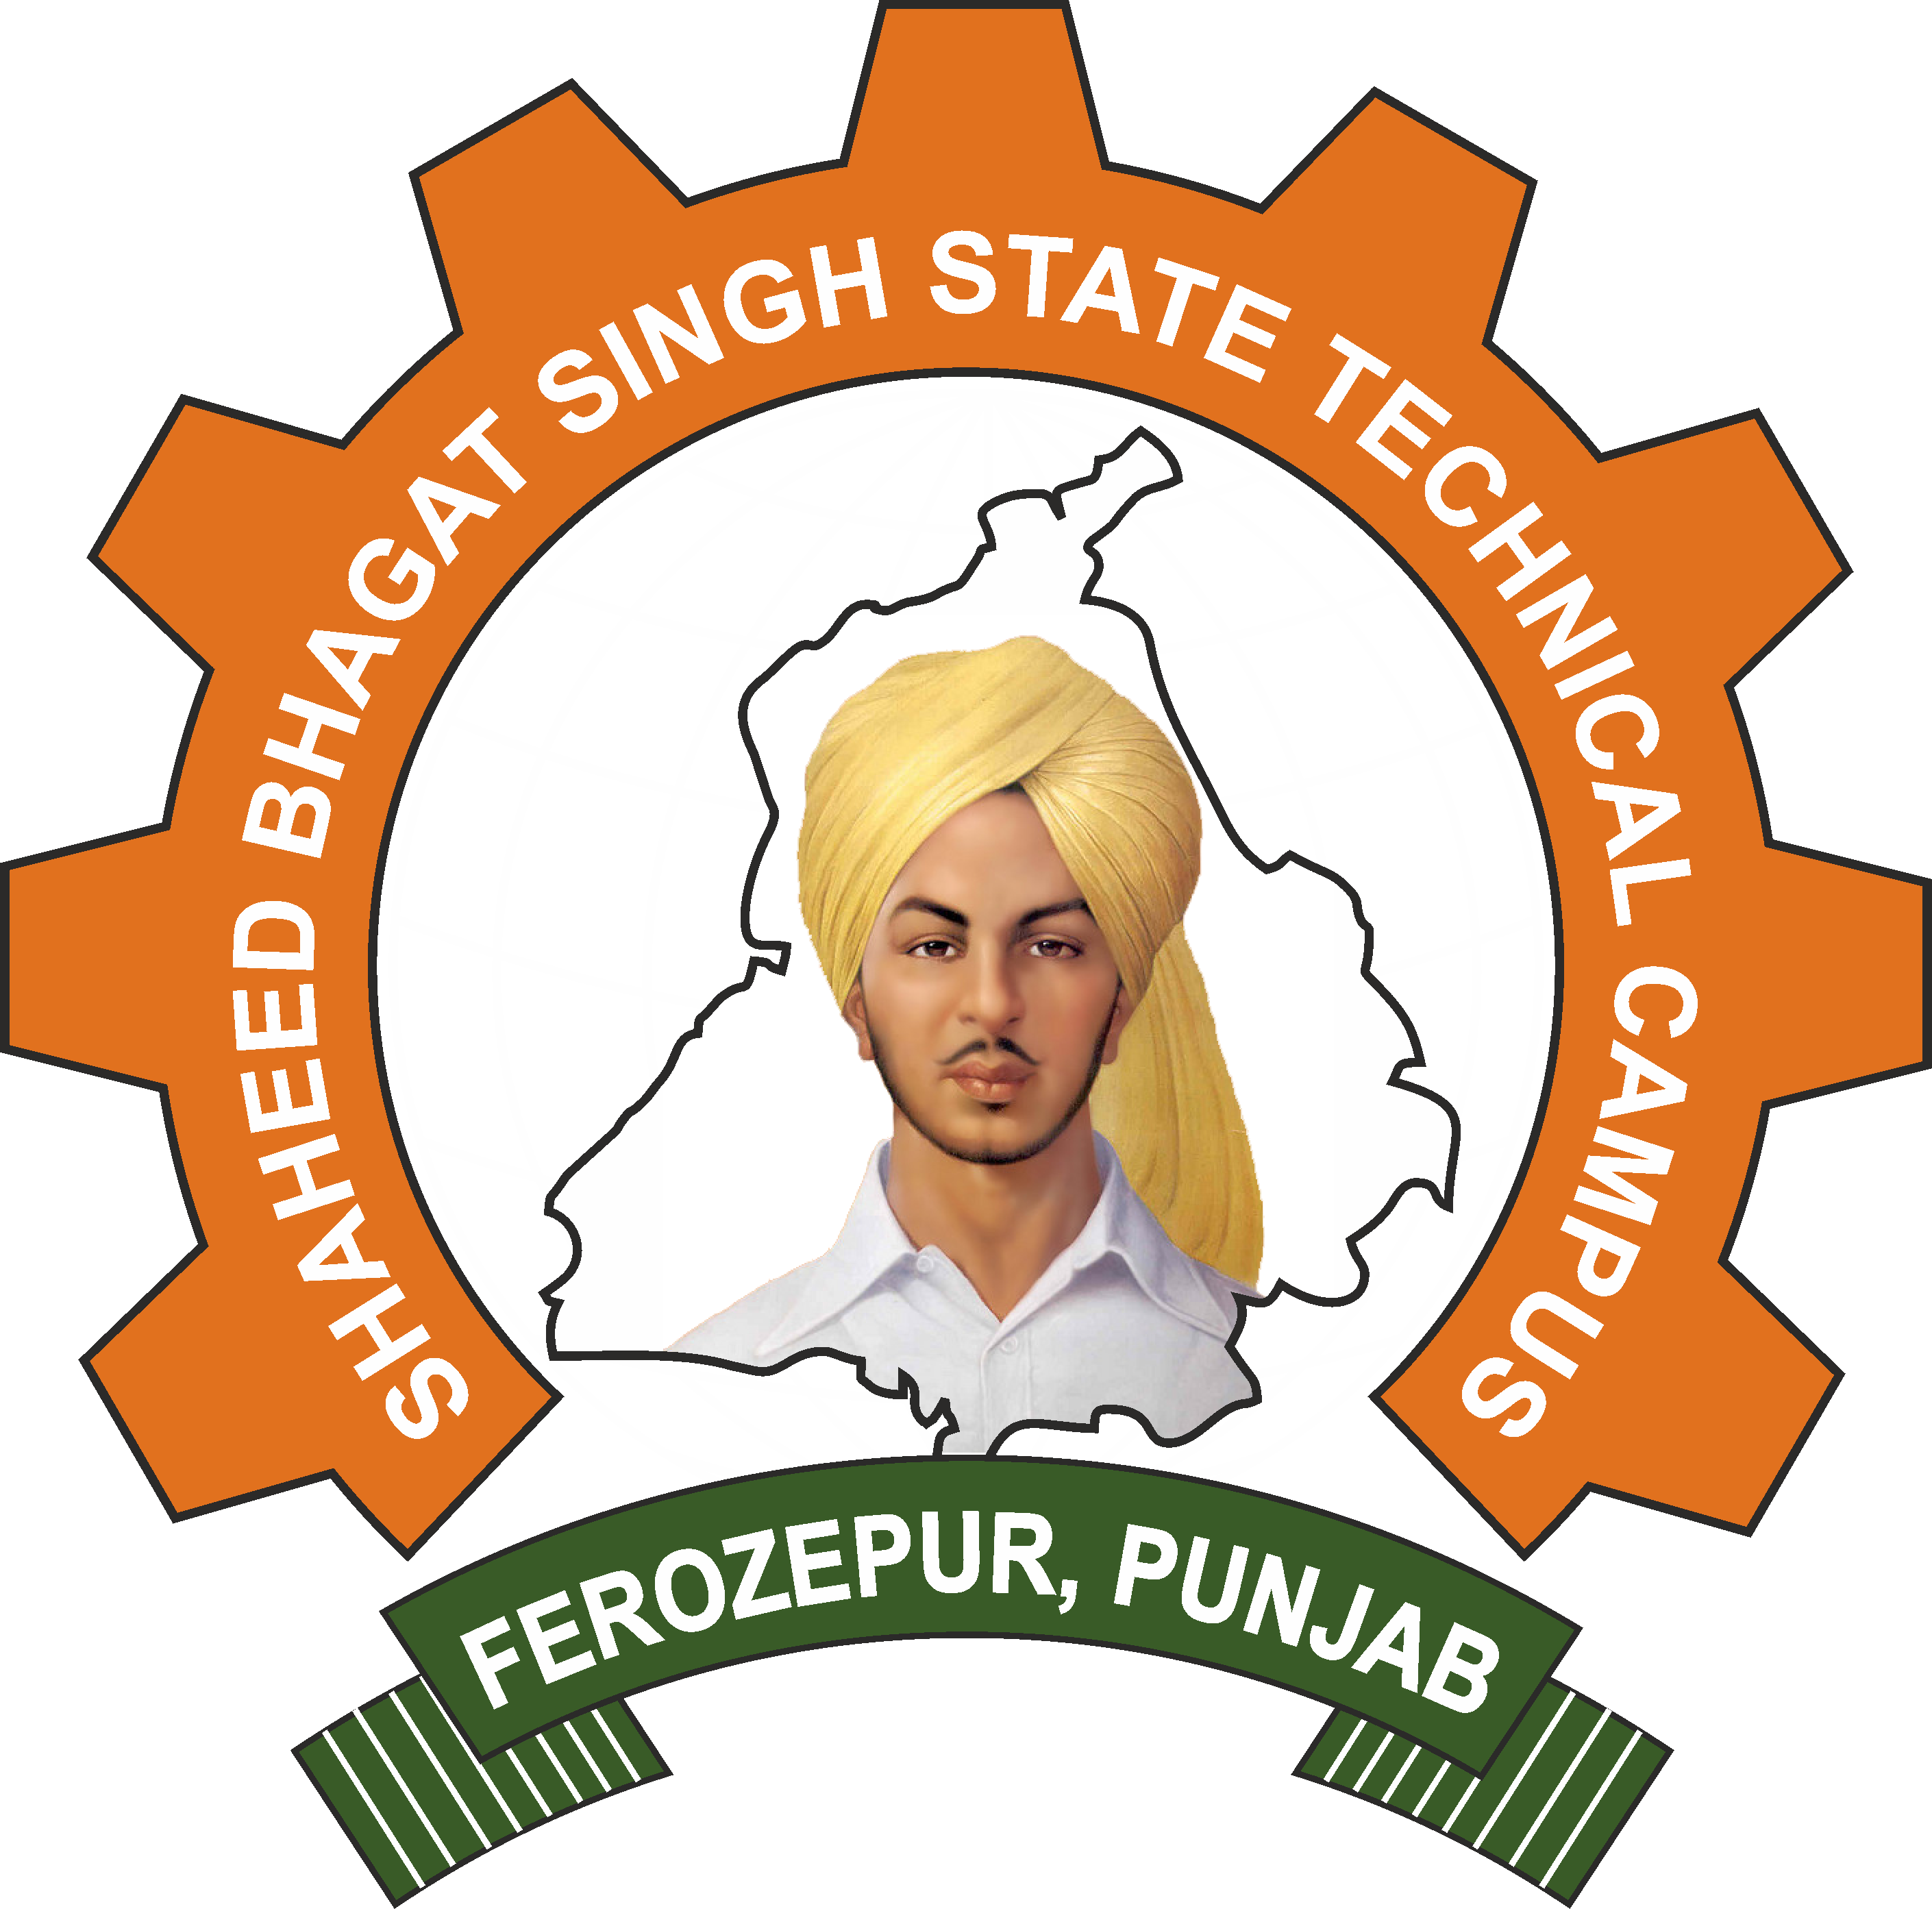 Bhagat Singh Hd Wallpaper - Shaheed Bhagat Singh State Technical Campus , HD Wallpaper & Backgrounds